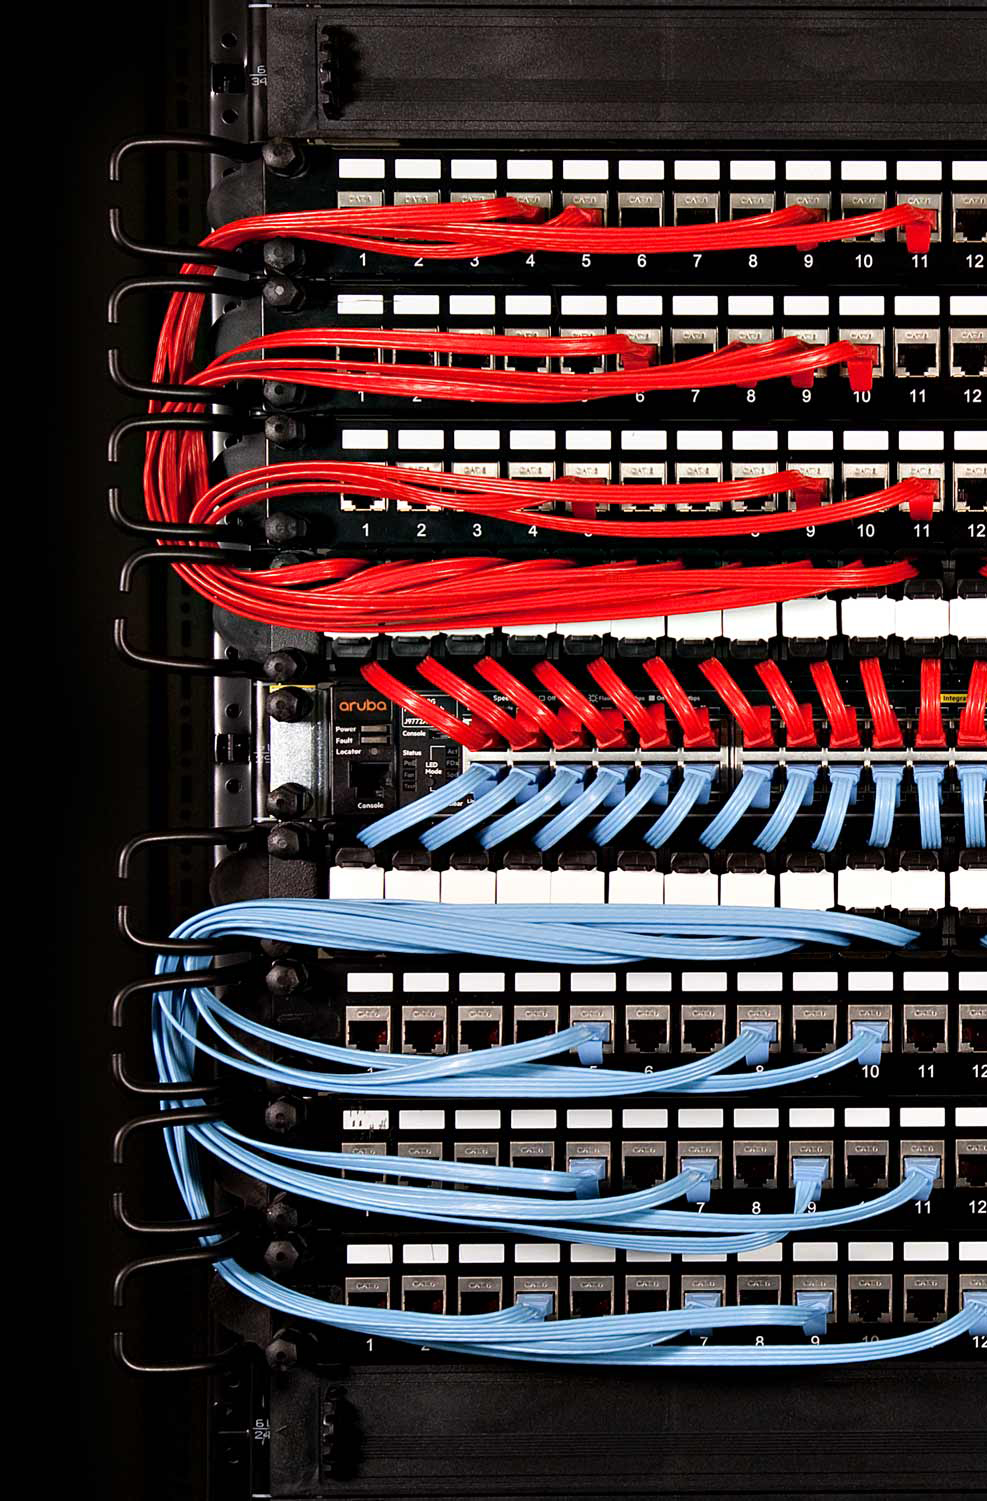 Structured Cabling System